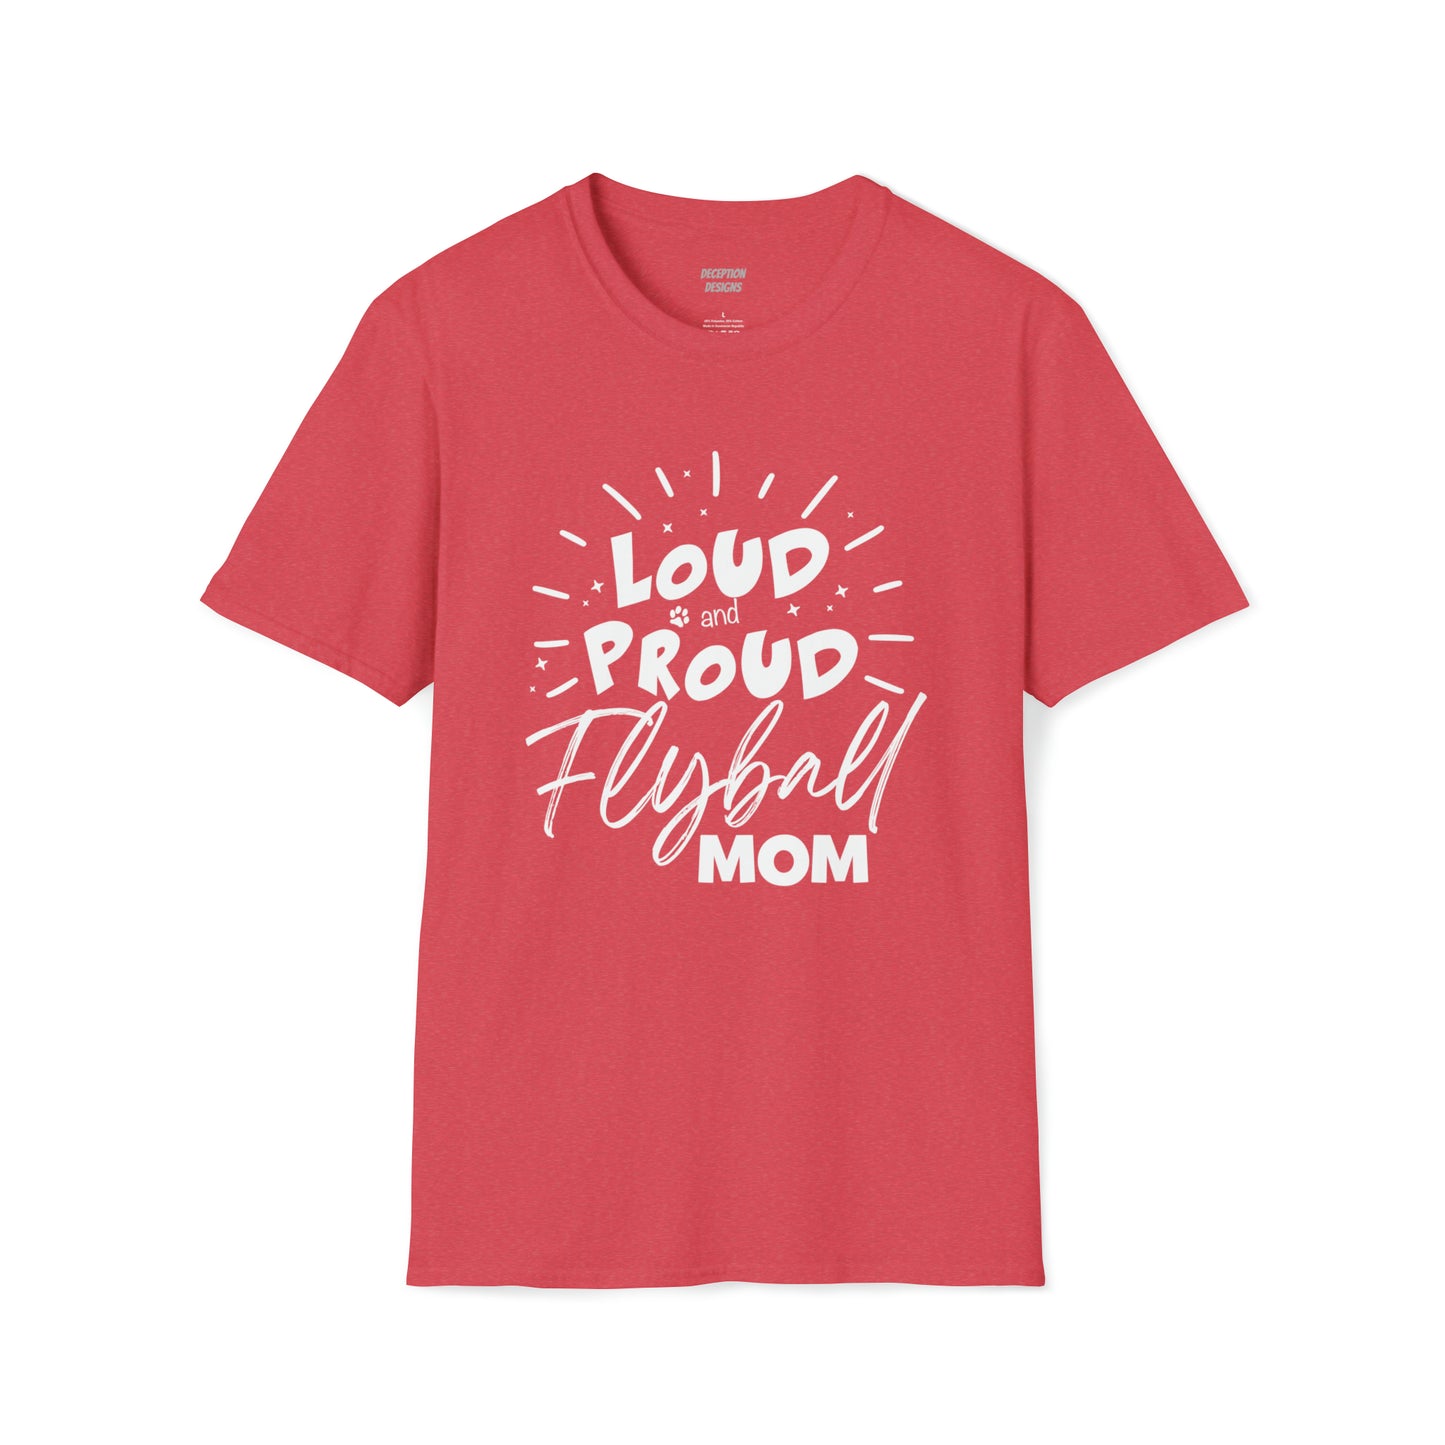 LOUD PROUD FLYBALL MOM -  Unisex Softstyle T-Shirt